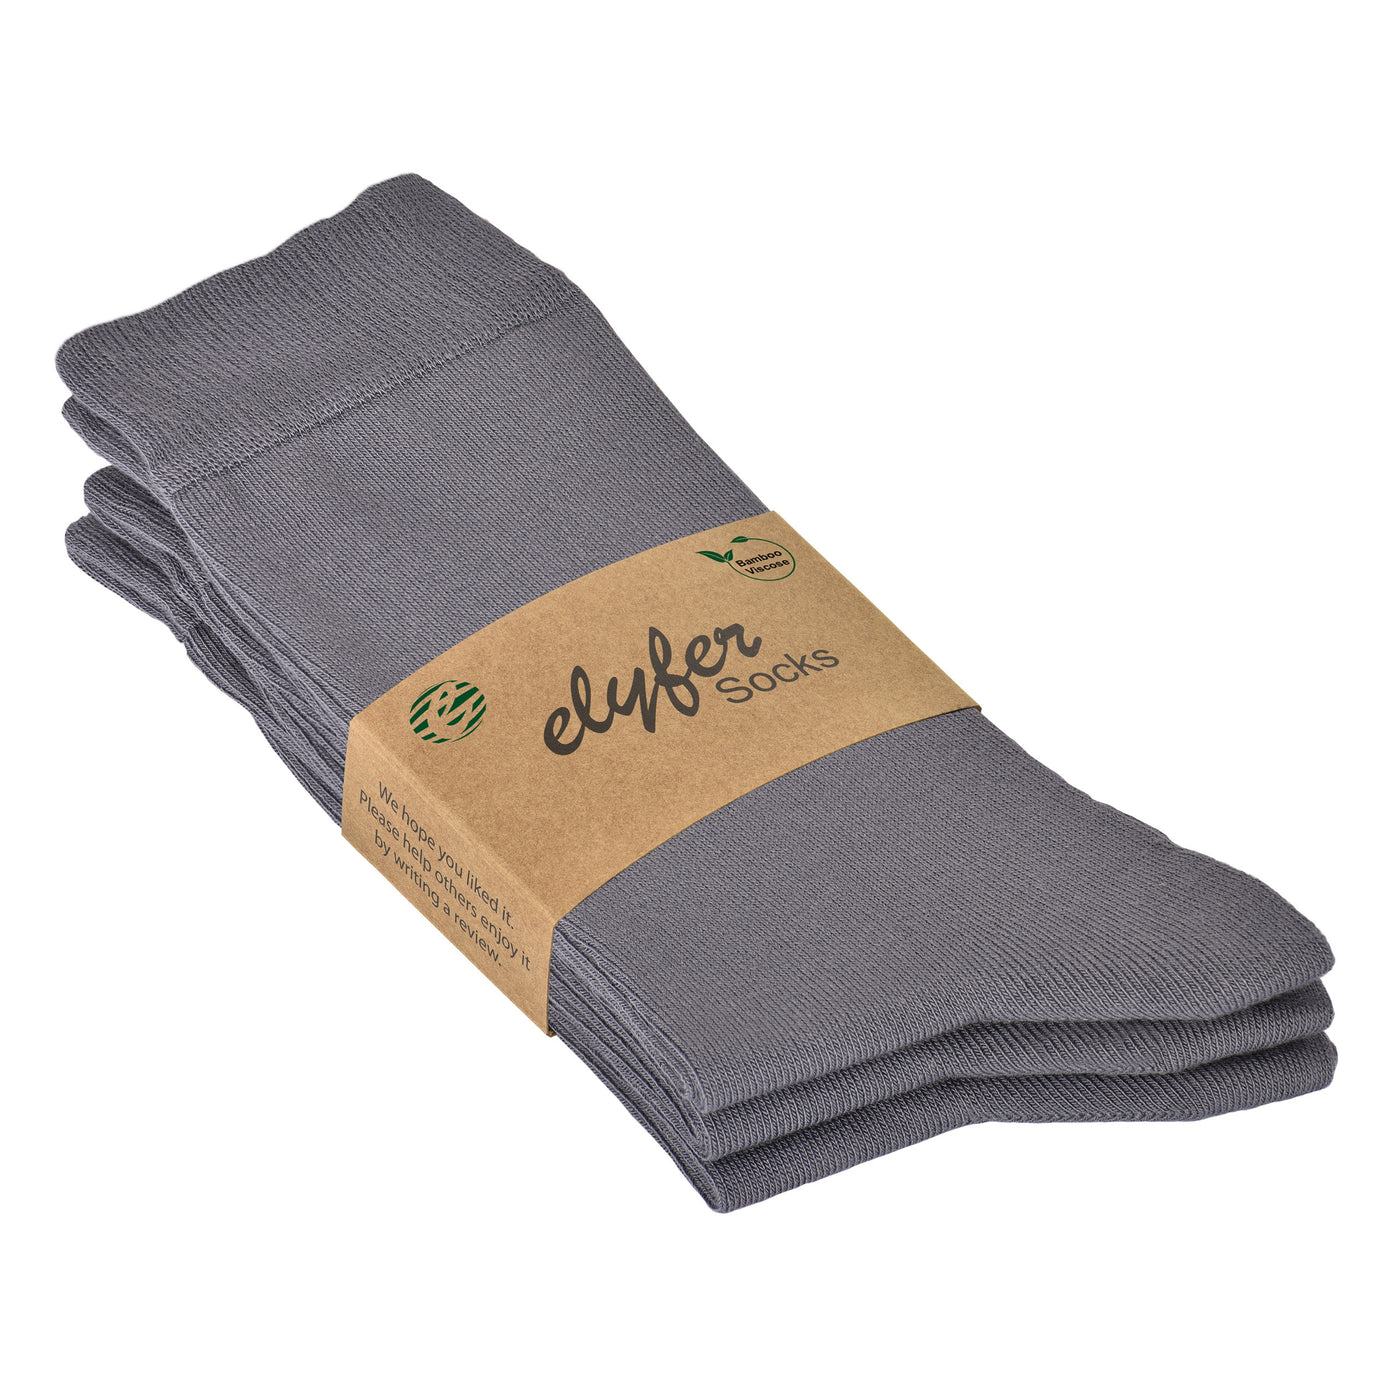 Women's Thin Bamboo Dress Socks Above Ankle #color_grey